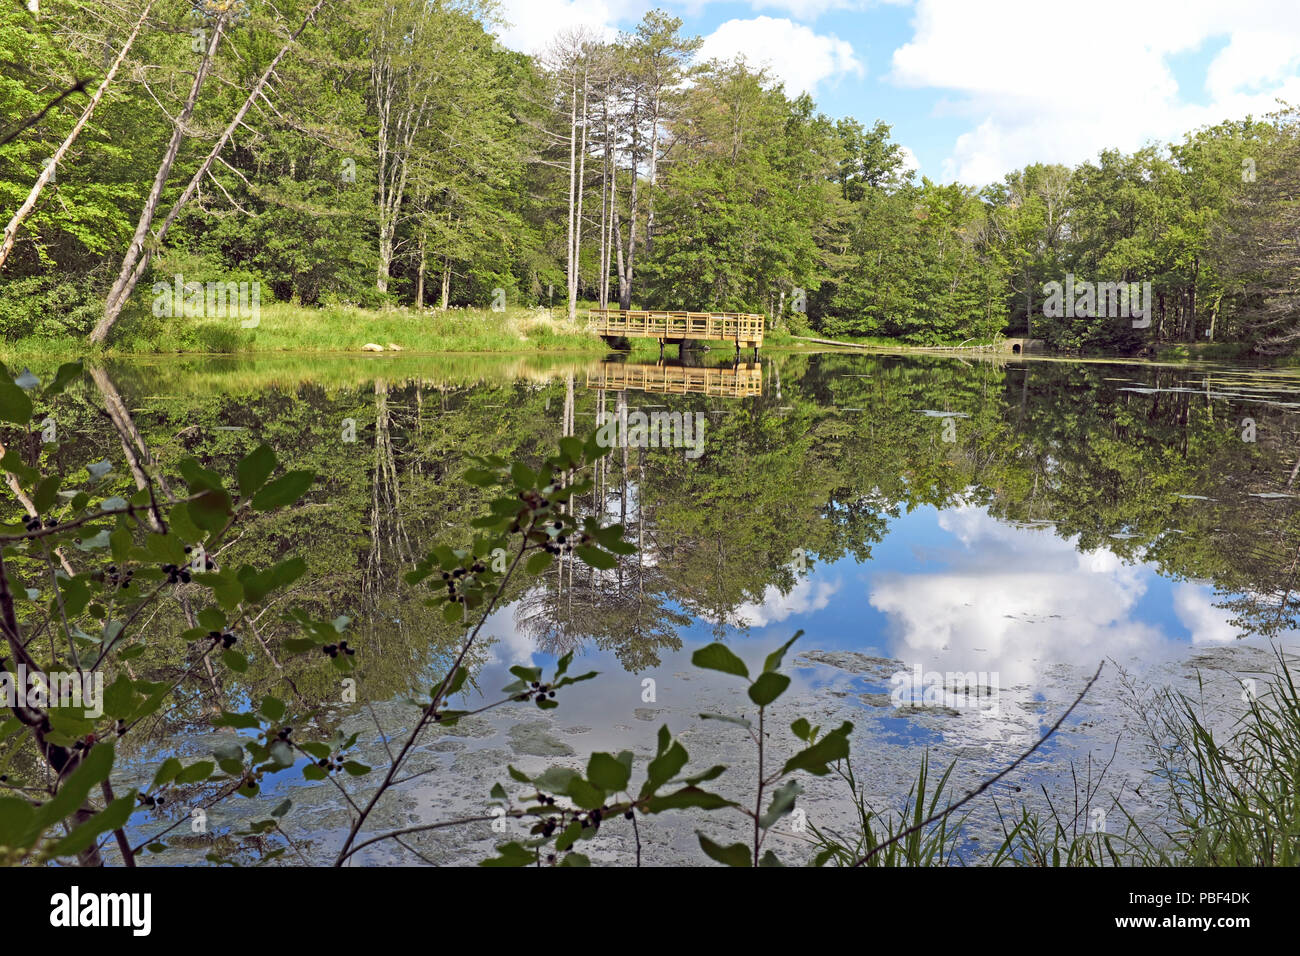 Sunset Pond in the North Chagrin Reservation of the Cleveland Metropark system in Willoughby during the summer reflects the foliage and blue sky. Stock Photo